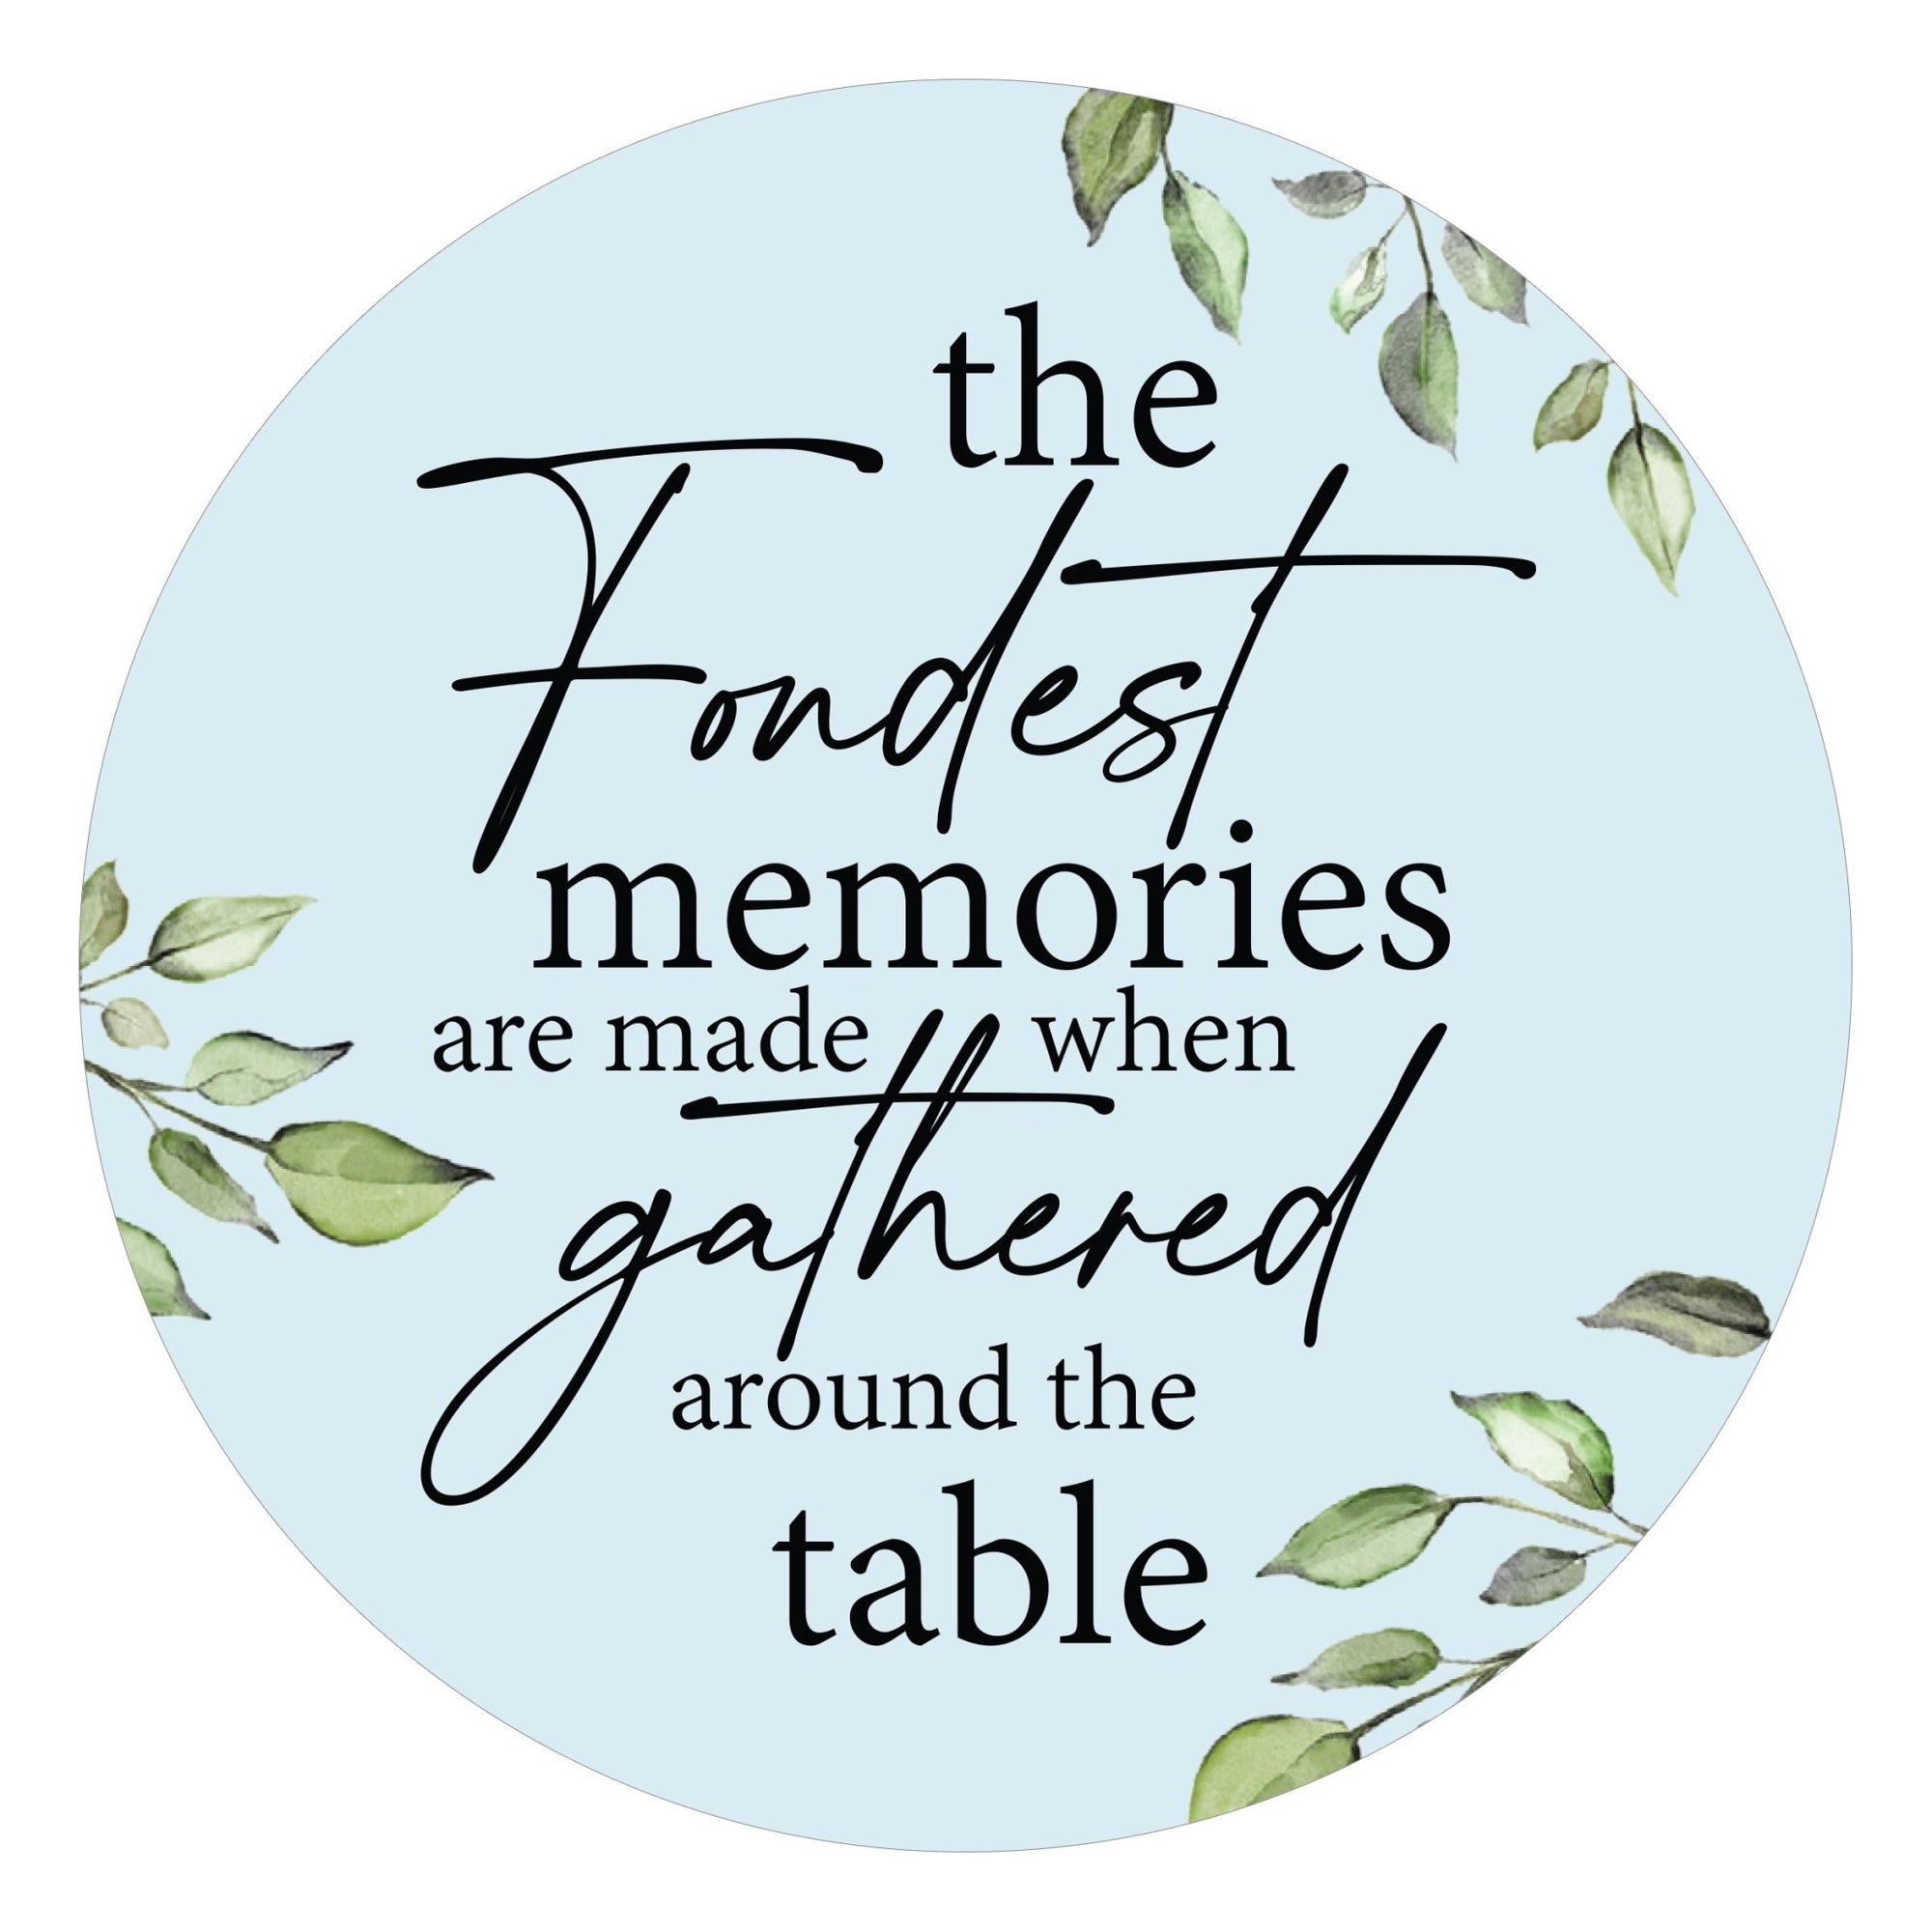 Family & Home Refrigerator Magnet Perfect Gift Idea For Home Décor - Fondest Memories